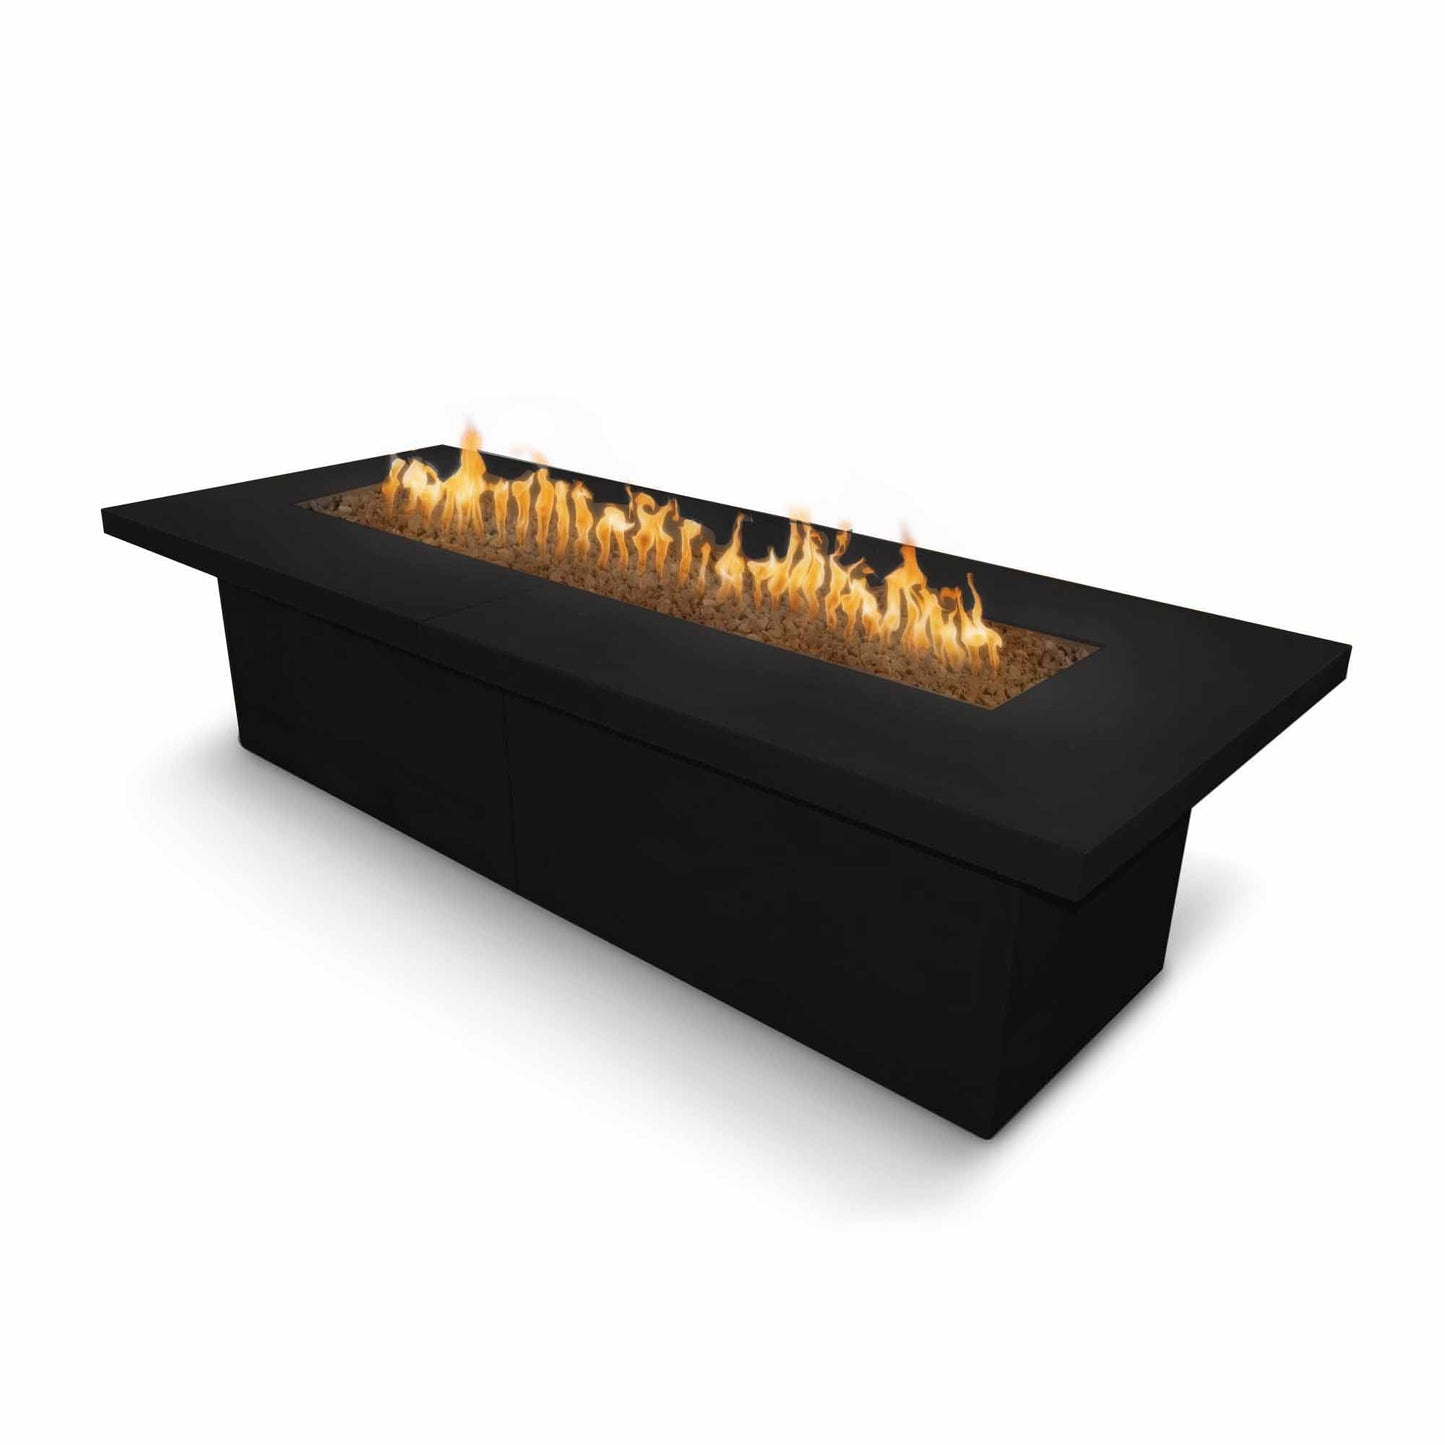 The Outdoor Plus Rectangular Newport 72" Java Powder Coated Metal Liquid Propane Fire Pit with Flame Sense with Spark Ignition